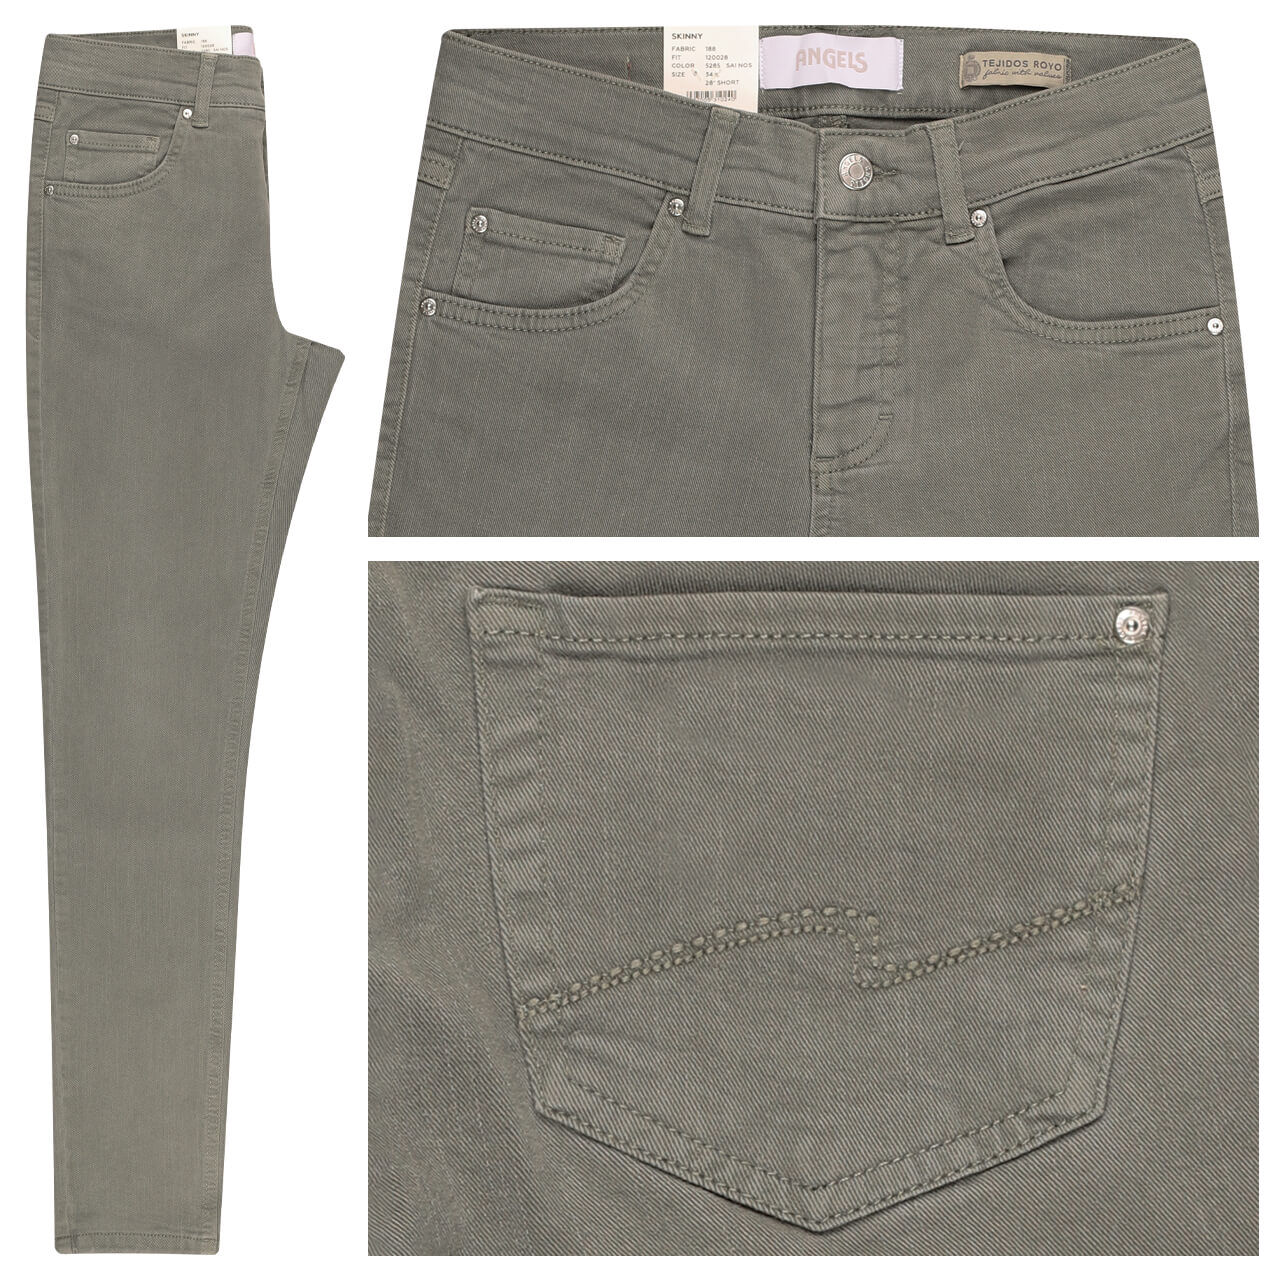 Angels Skinny Jeans past olive used